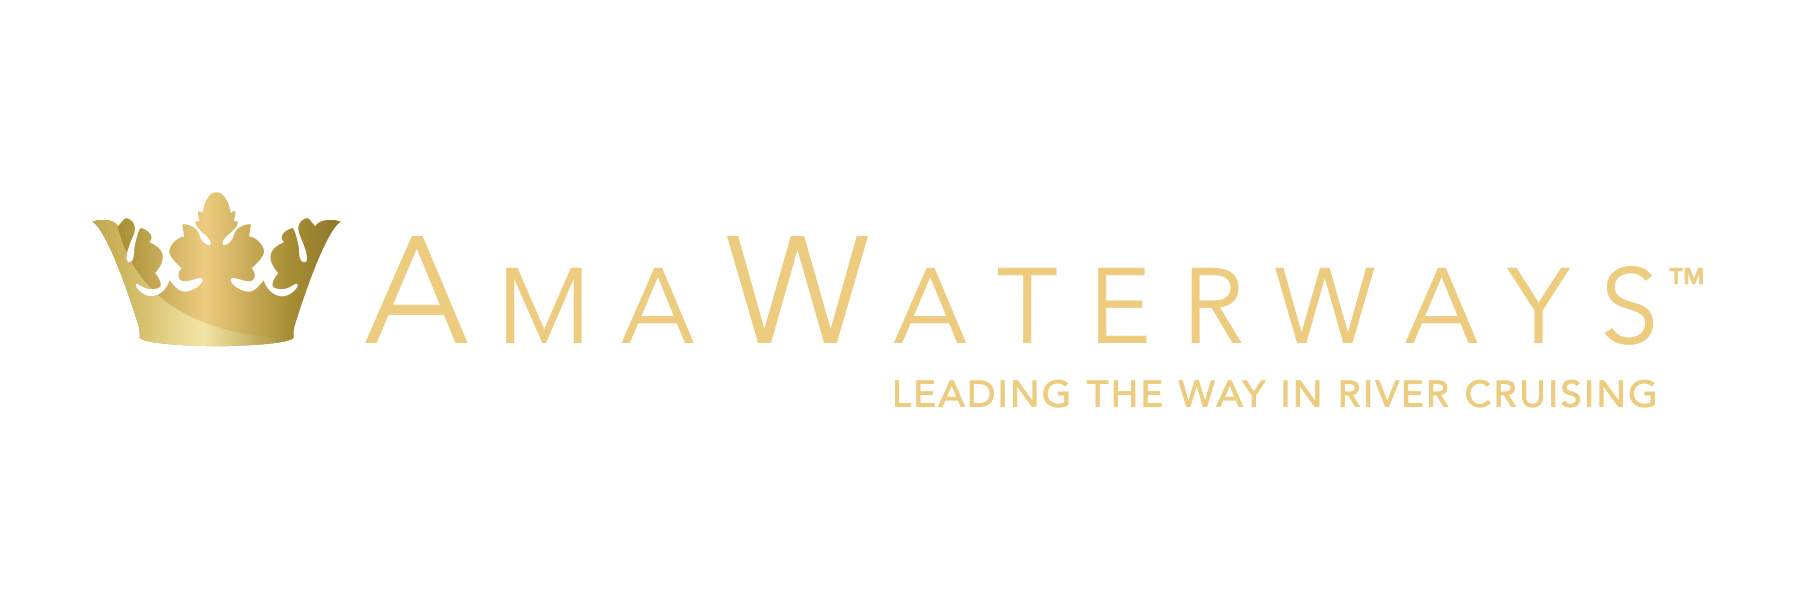 AMAWaterways Cream and Gold logo with tagline